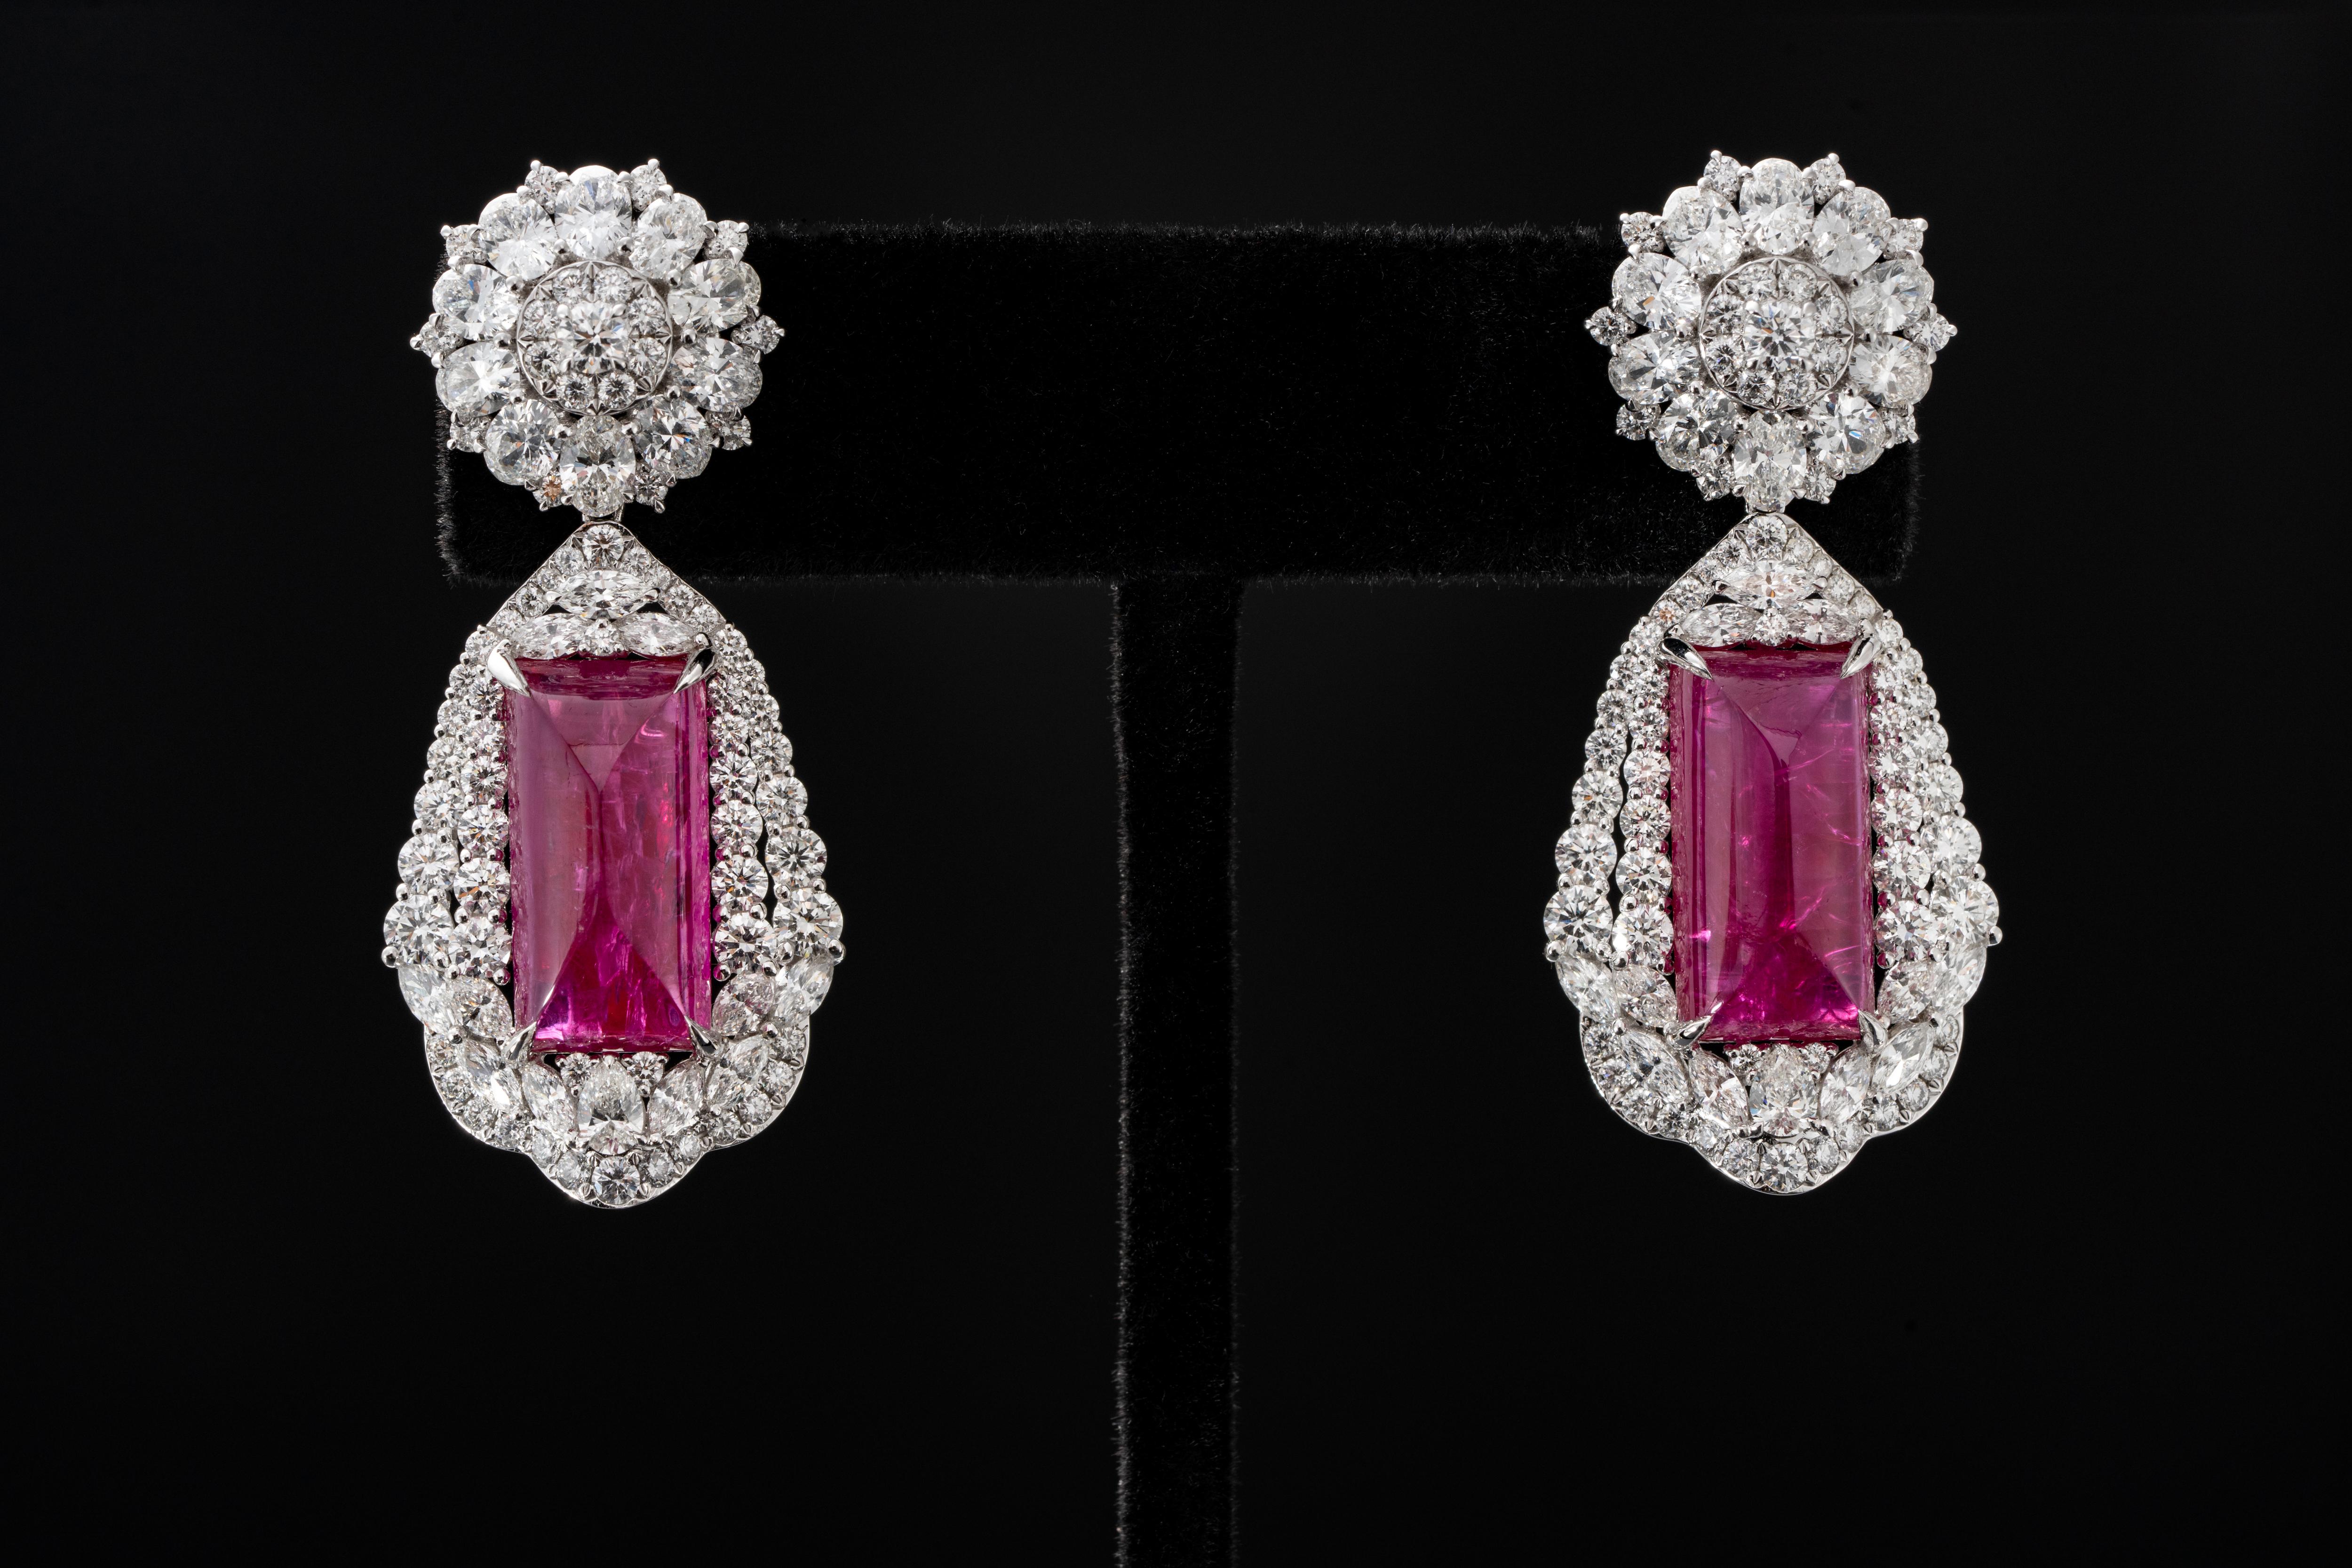 The pair of earrings ,each set with a rectangular-shaped Burmese Cab no heated ruby weighing 12.54 and 14.40 carats respectively.
The presence of the ruby larger than 10 carats is worth for celebration for gem collectors, and it is over 10 carats